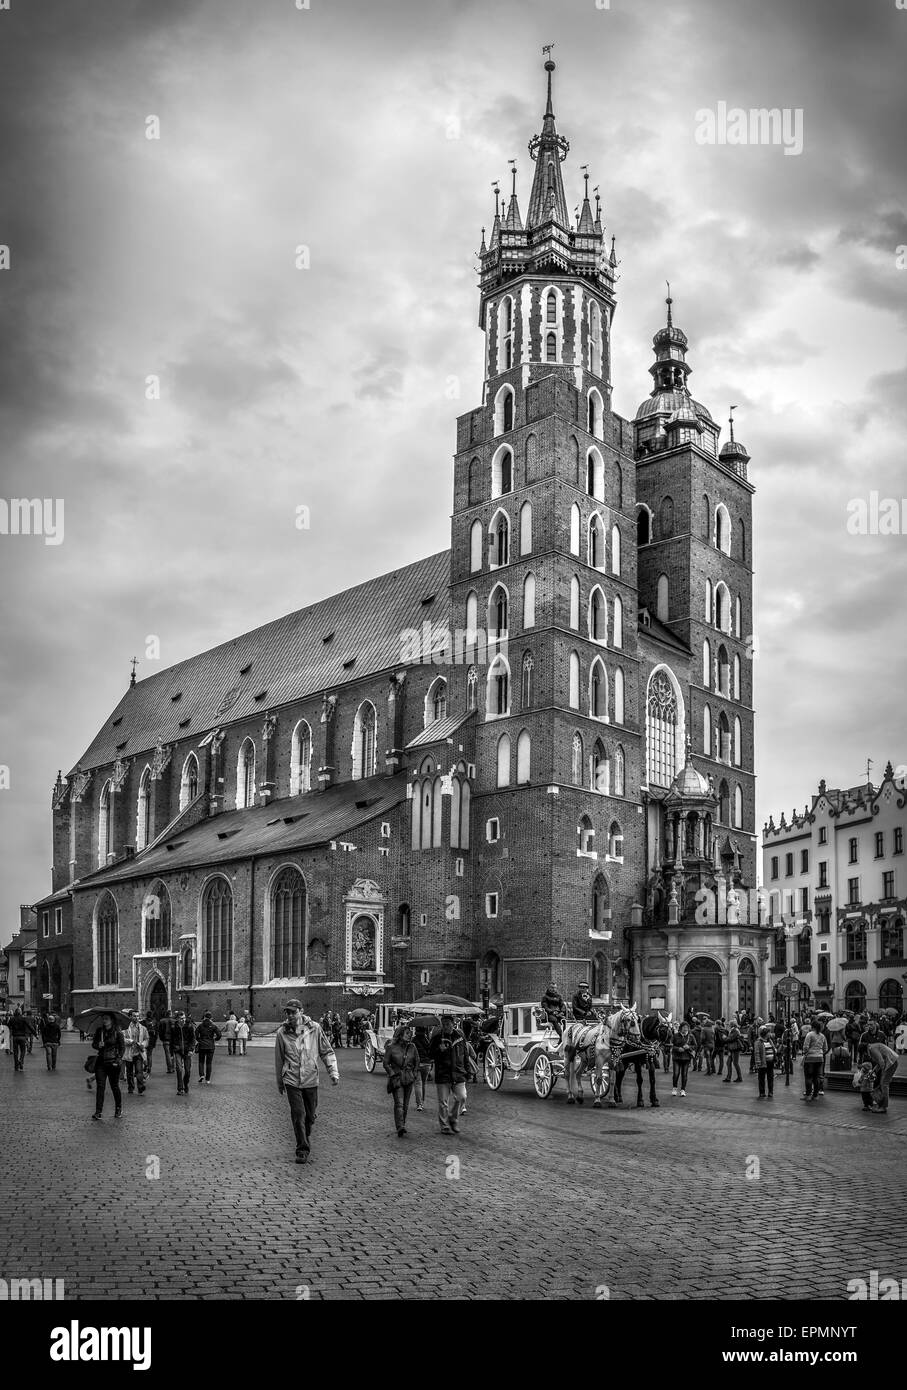 CRACOW, POLAND - MAY 01, 2015: black and white photo of Mariacki church at the Main Square in Cracow ( Krakow ), Poland Stock Photo